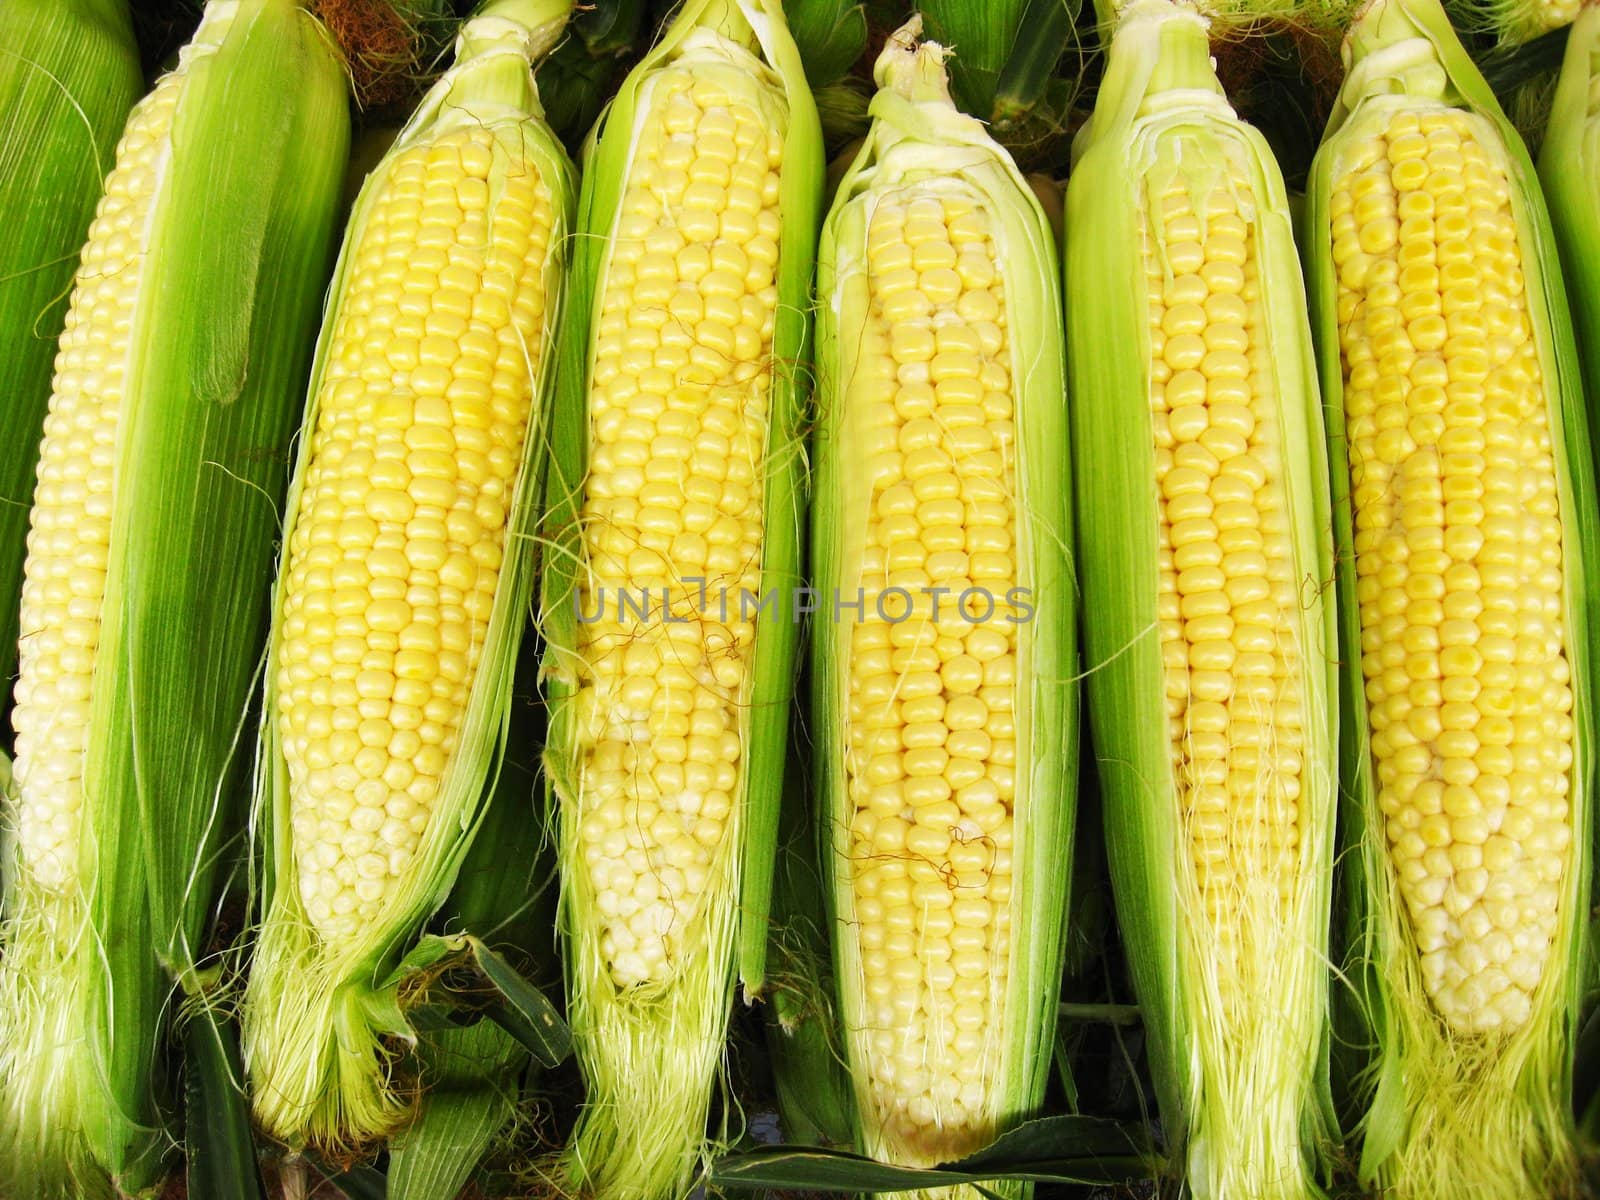 The image of harvest of ripe maize